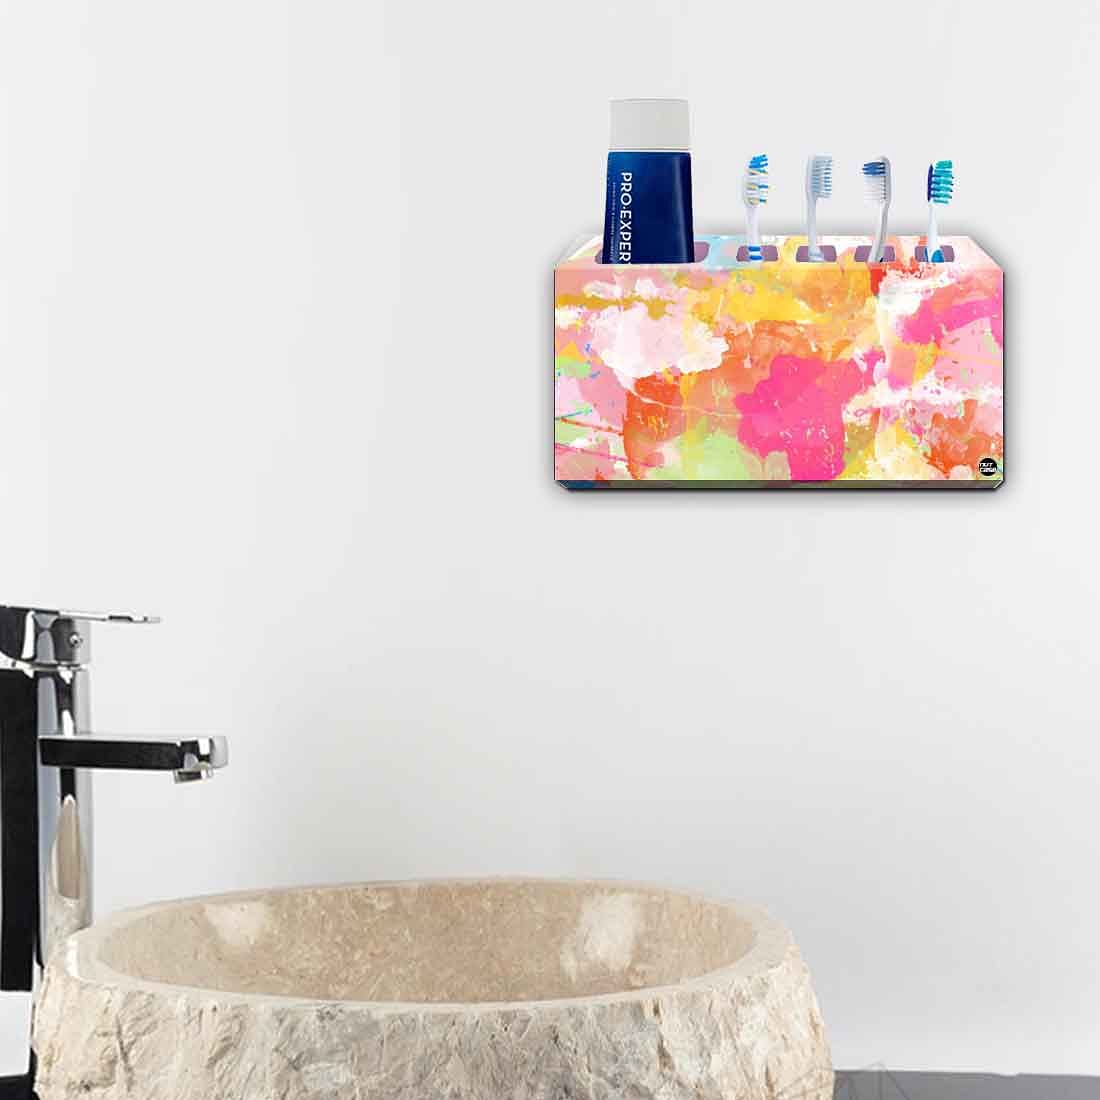 Toothbrush Holder Wall Mounted -Marble Waves Nutcase